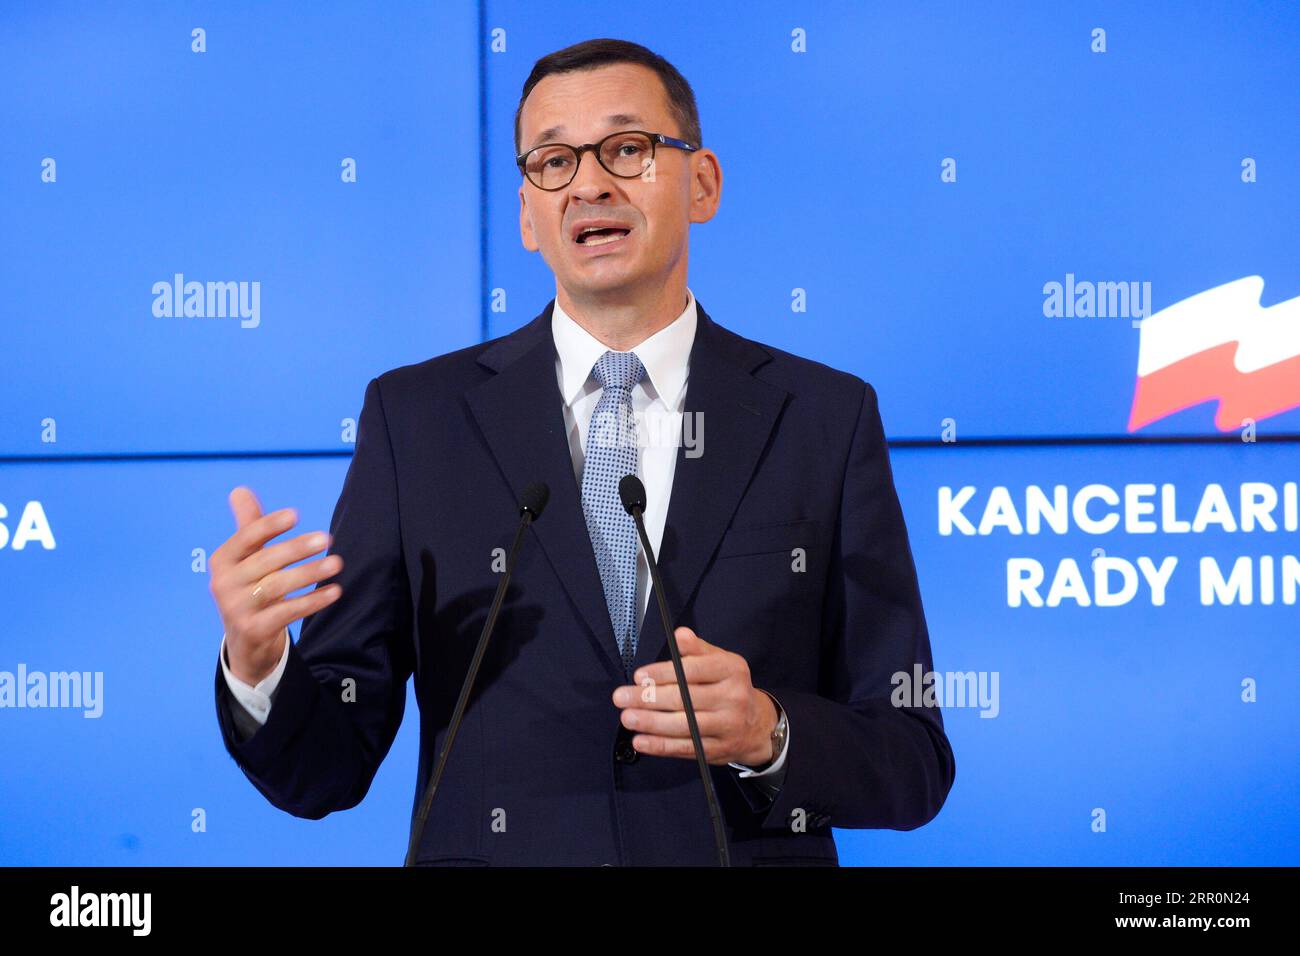 200820 -- WARSAW, Aug. 20, 2020 -- Polish Prime Minister Mateusz Morawiecki speaks during a press conference in Warsaw, Poland, on Aug. 20, 2020. Morawiecki on Thursday announced that Adam Niedzielski would replace Lukasz Szumowski as the new health minister while Zbigniew Rau would replace Jacek Czaputowicz as the new foreign minister, Polish Press Agency reported. Photo by /Xinhua POLAND-WARSAW-PM-PRESS CONFERENCE JaapxArriens PUBLICATIONxNOTxINxCHN Stock Photo